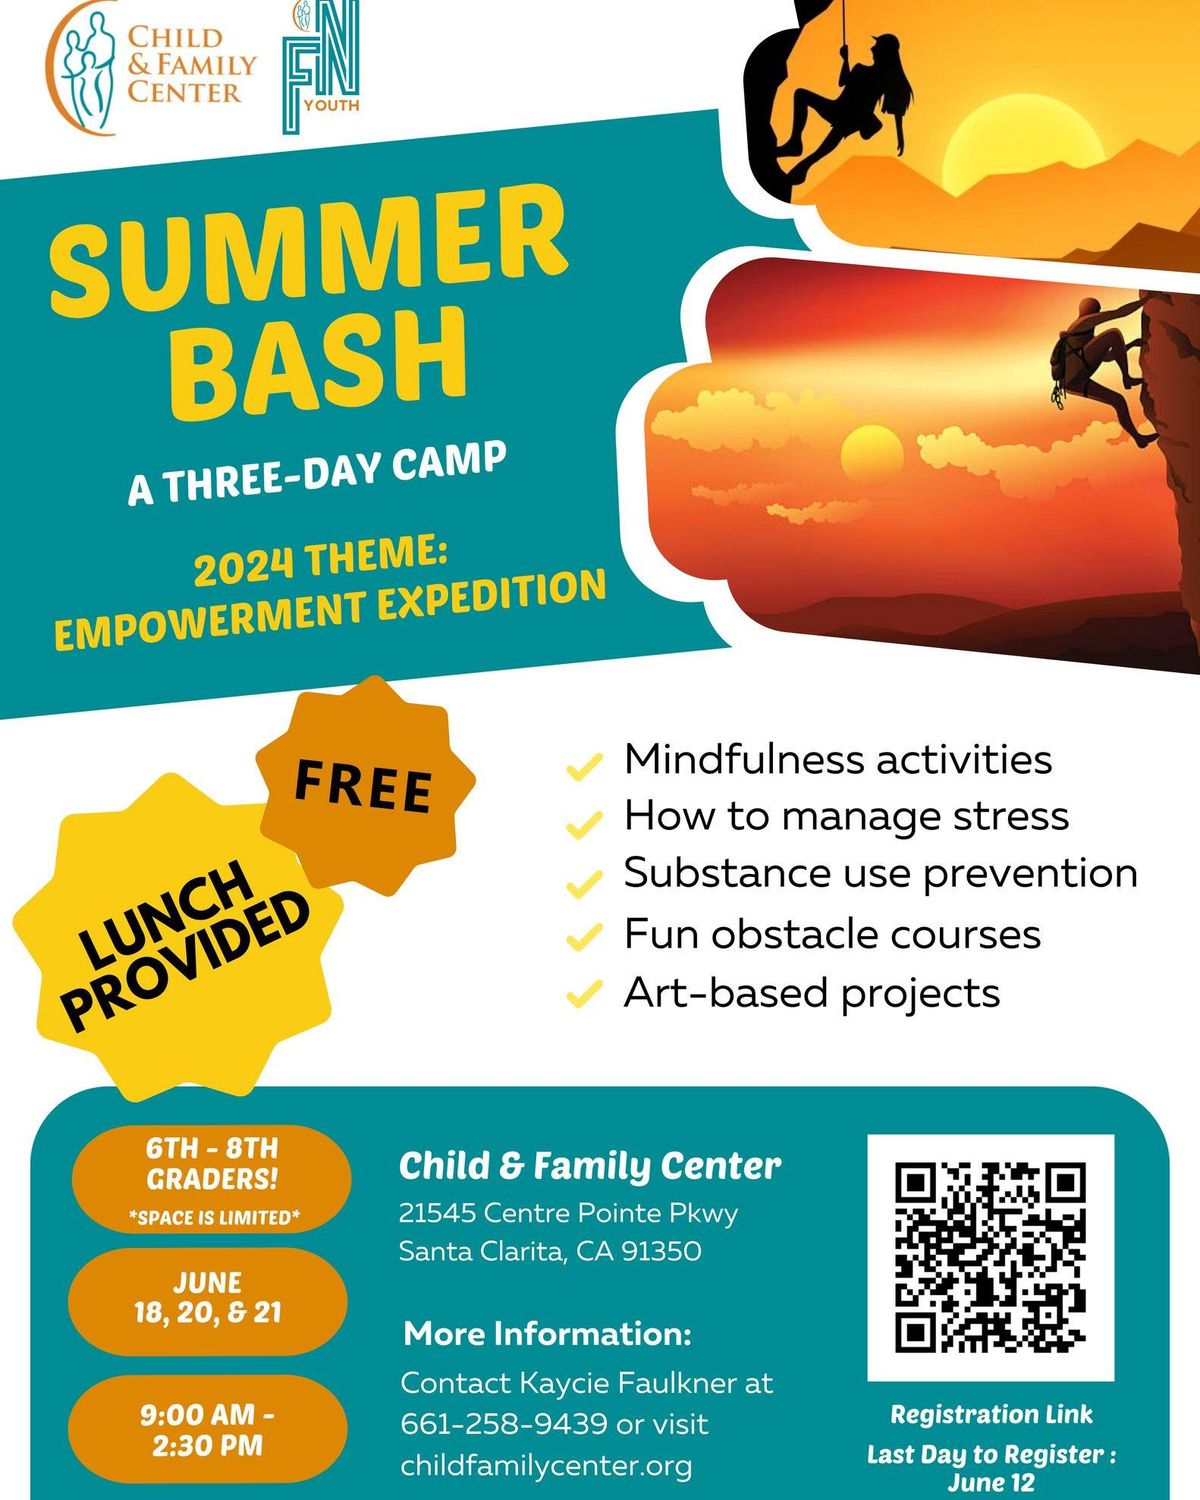 Summer Bash - FREE Three-day camp by Child & Family Center for 6th-8th graders for 